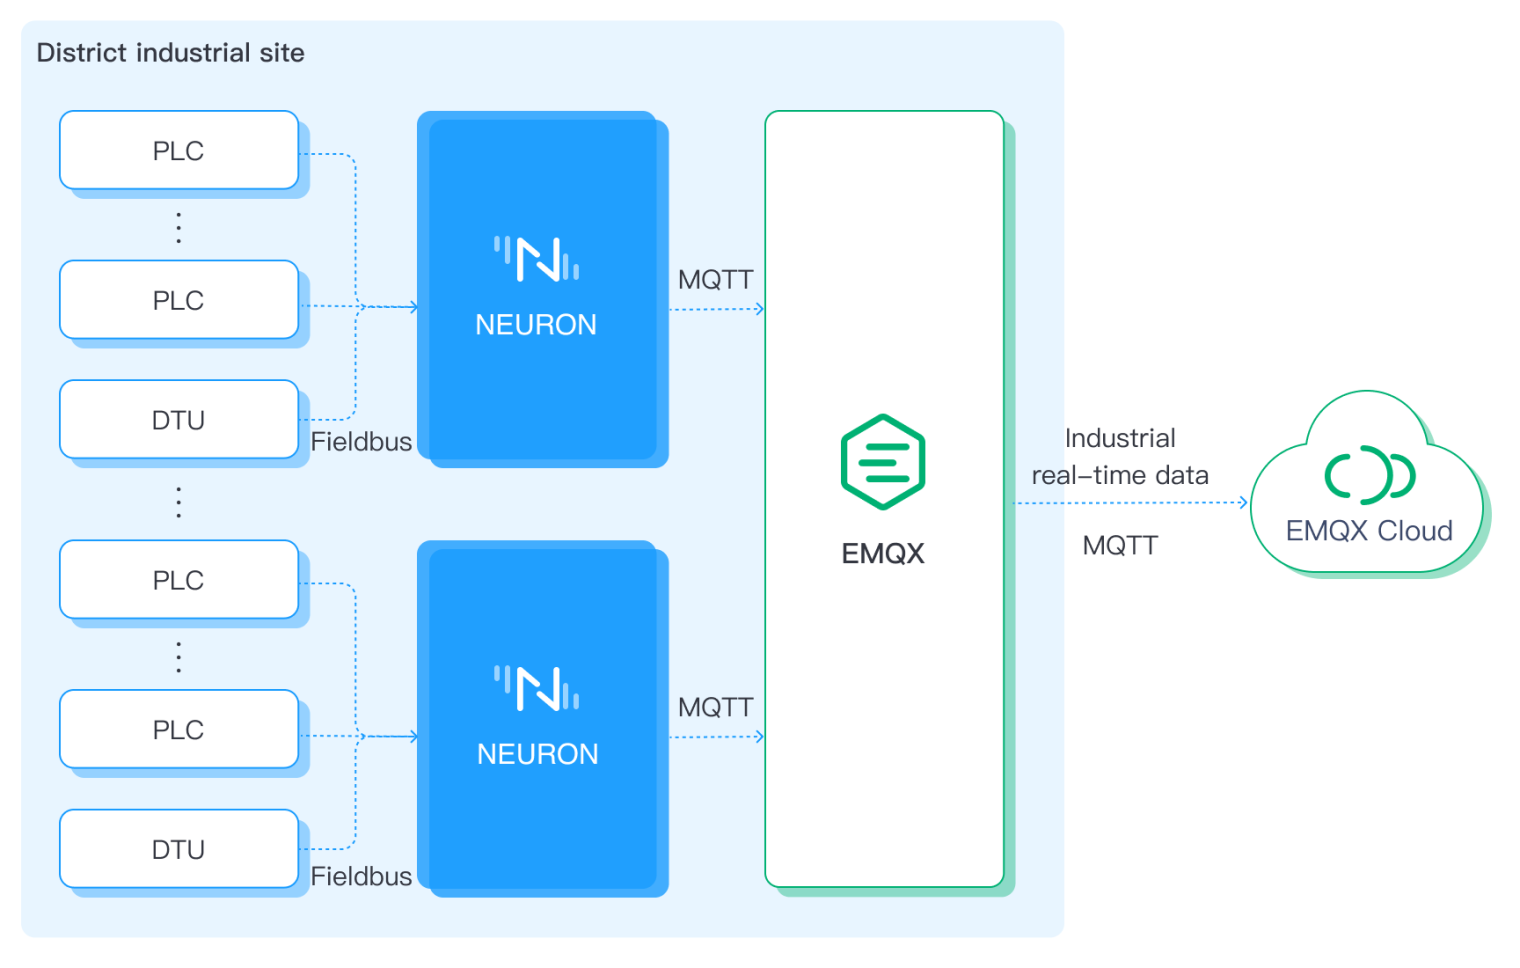 The Architecture of KNX to MQTT Bridging